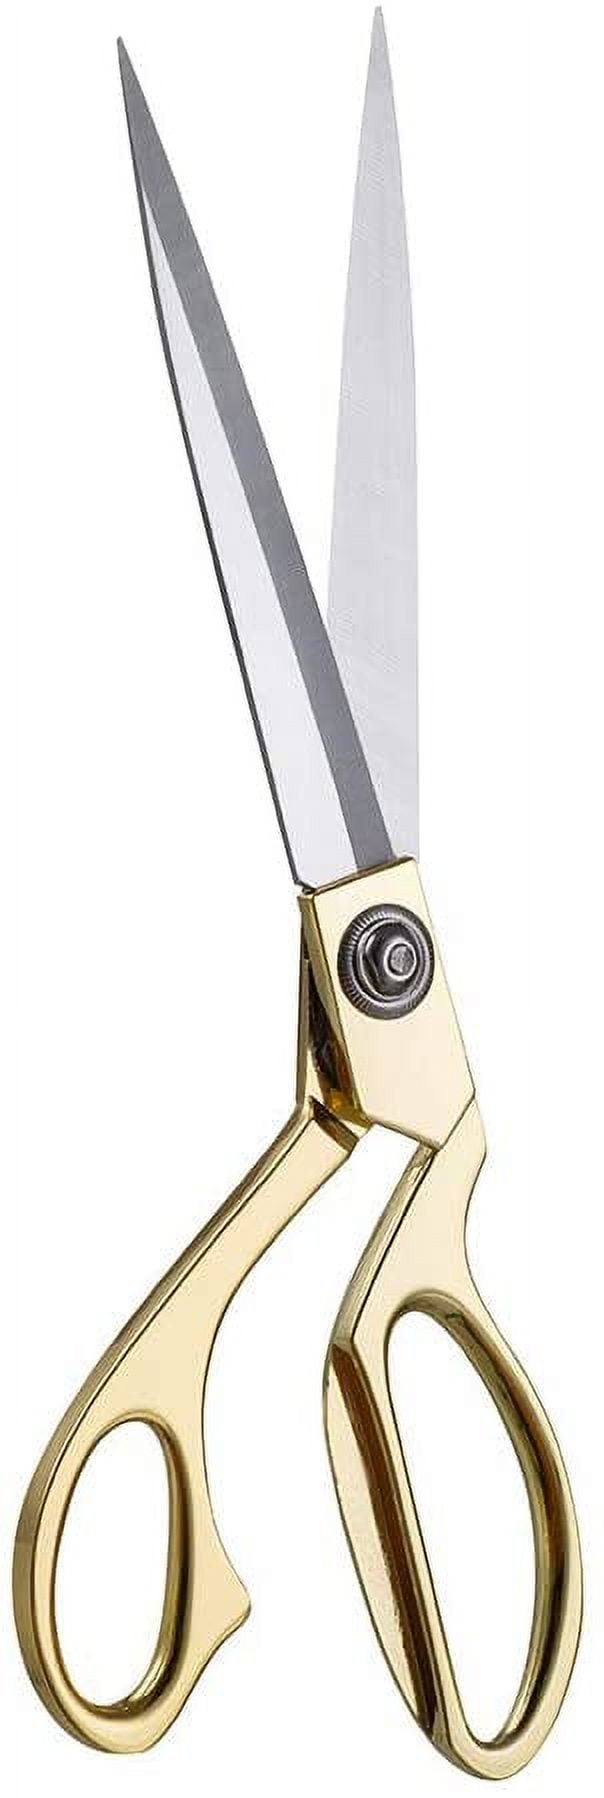 Dropship One Pair Of Golden Fabric Scissors Stainless Steel Sharp